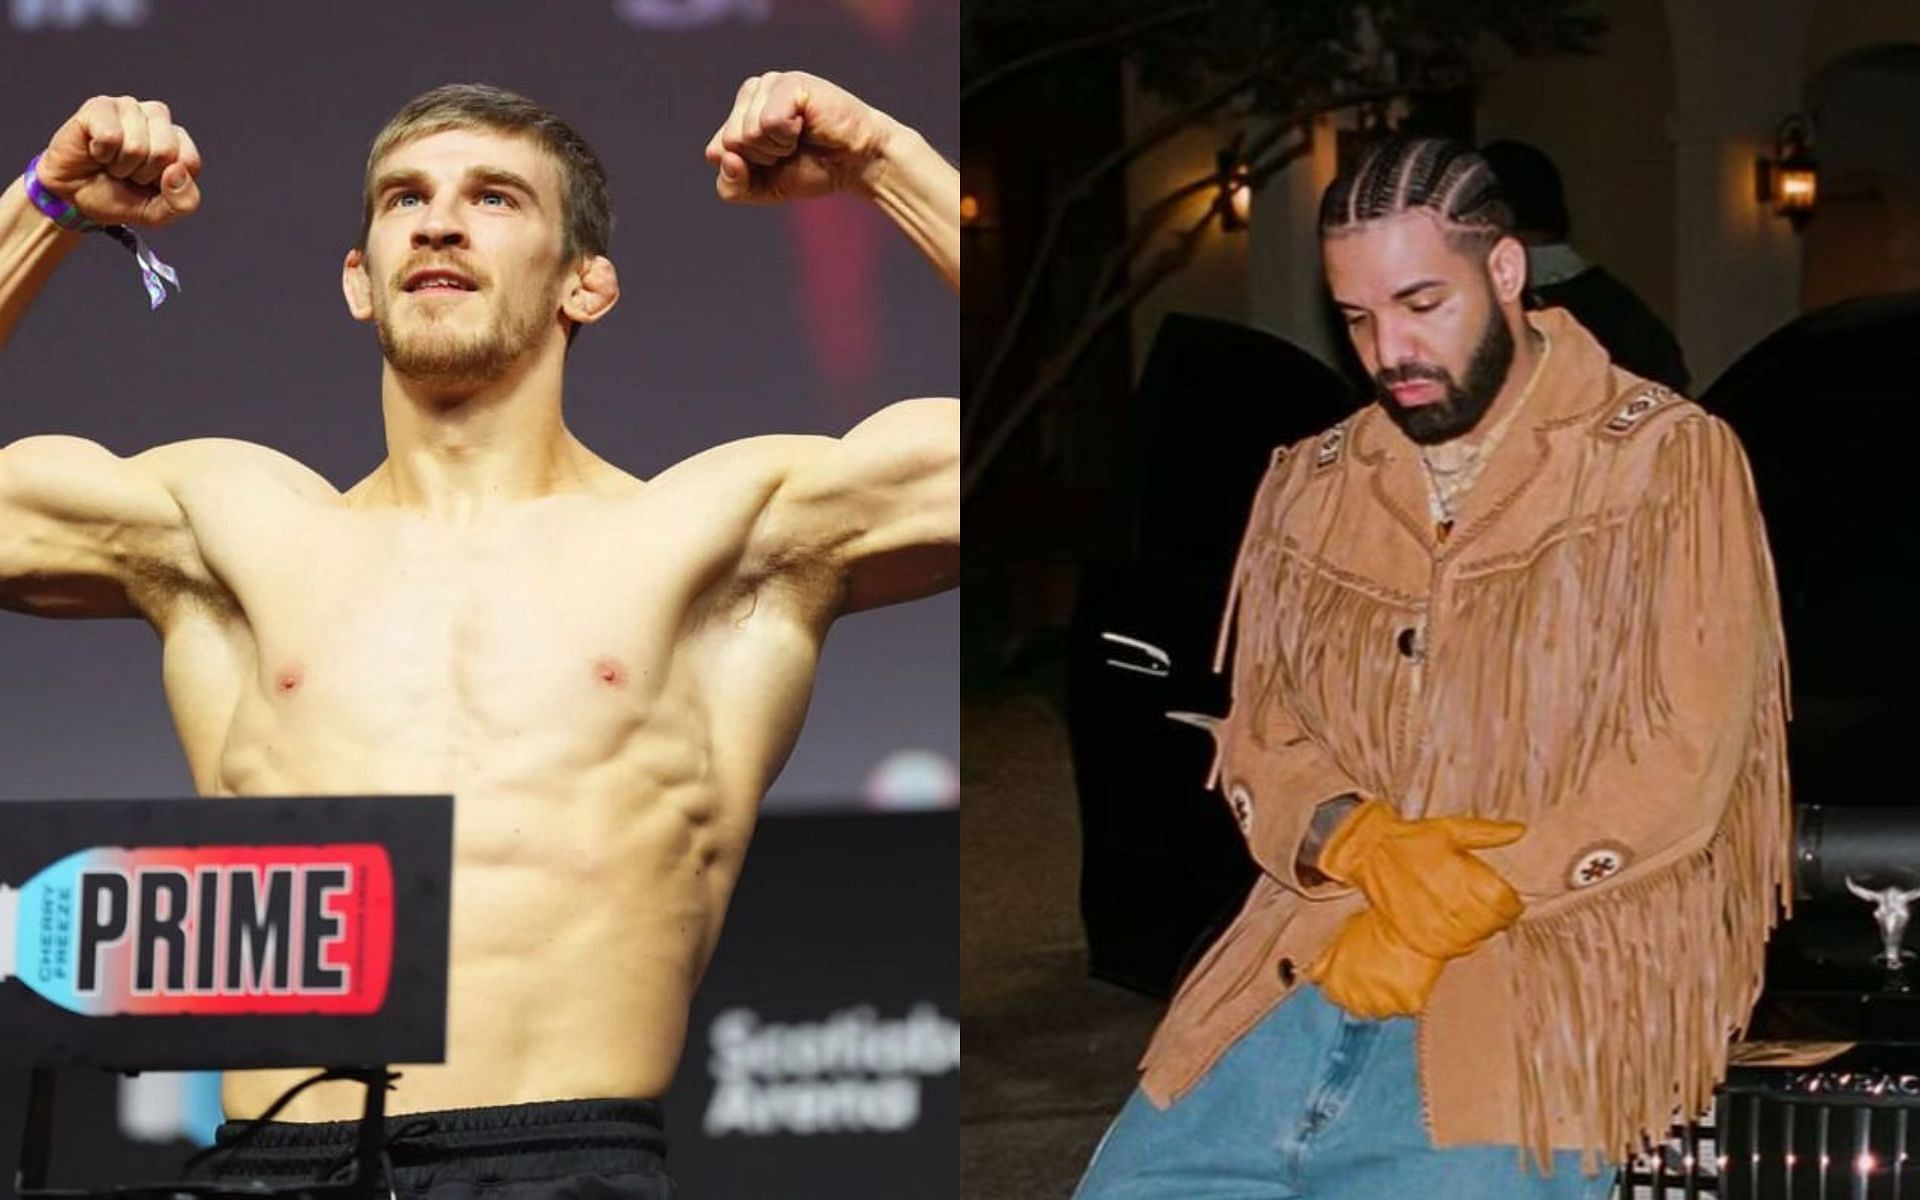 Arnold Allen (left) recounts a funny backstage incident with Drake (right) [Images courtesy: @arnoldbfa and @champagnepapi on Instagram]